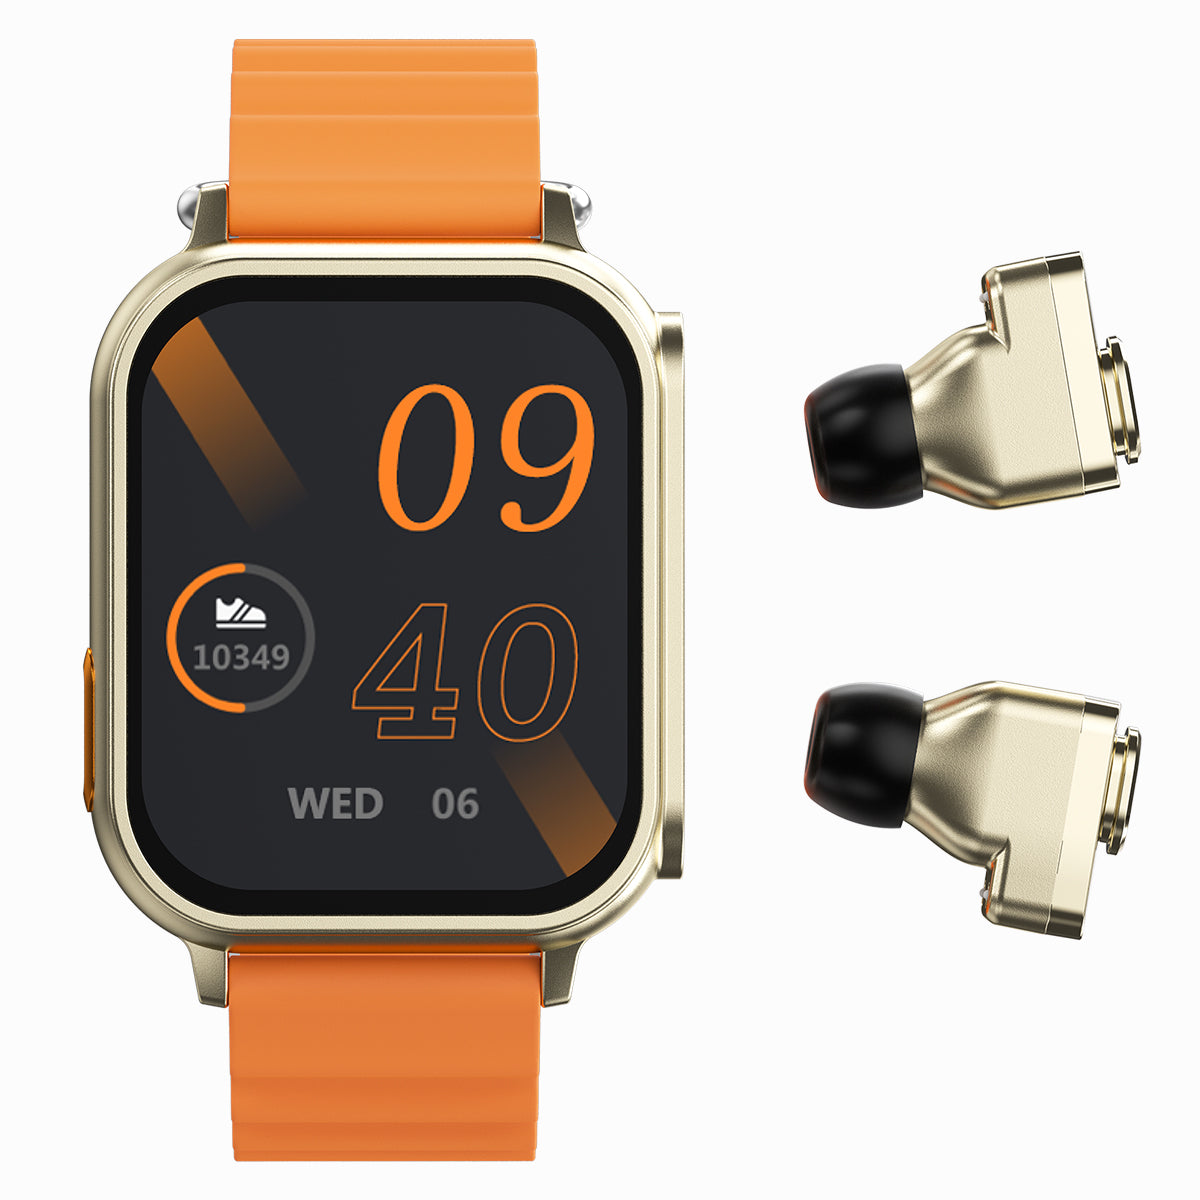 Wholesale Smartwatch Online - Buy Reliable Smartwatch Online from Smartwatch  Online Wholesalers On Made-in-China.com